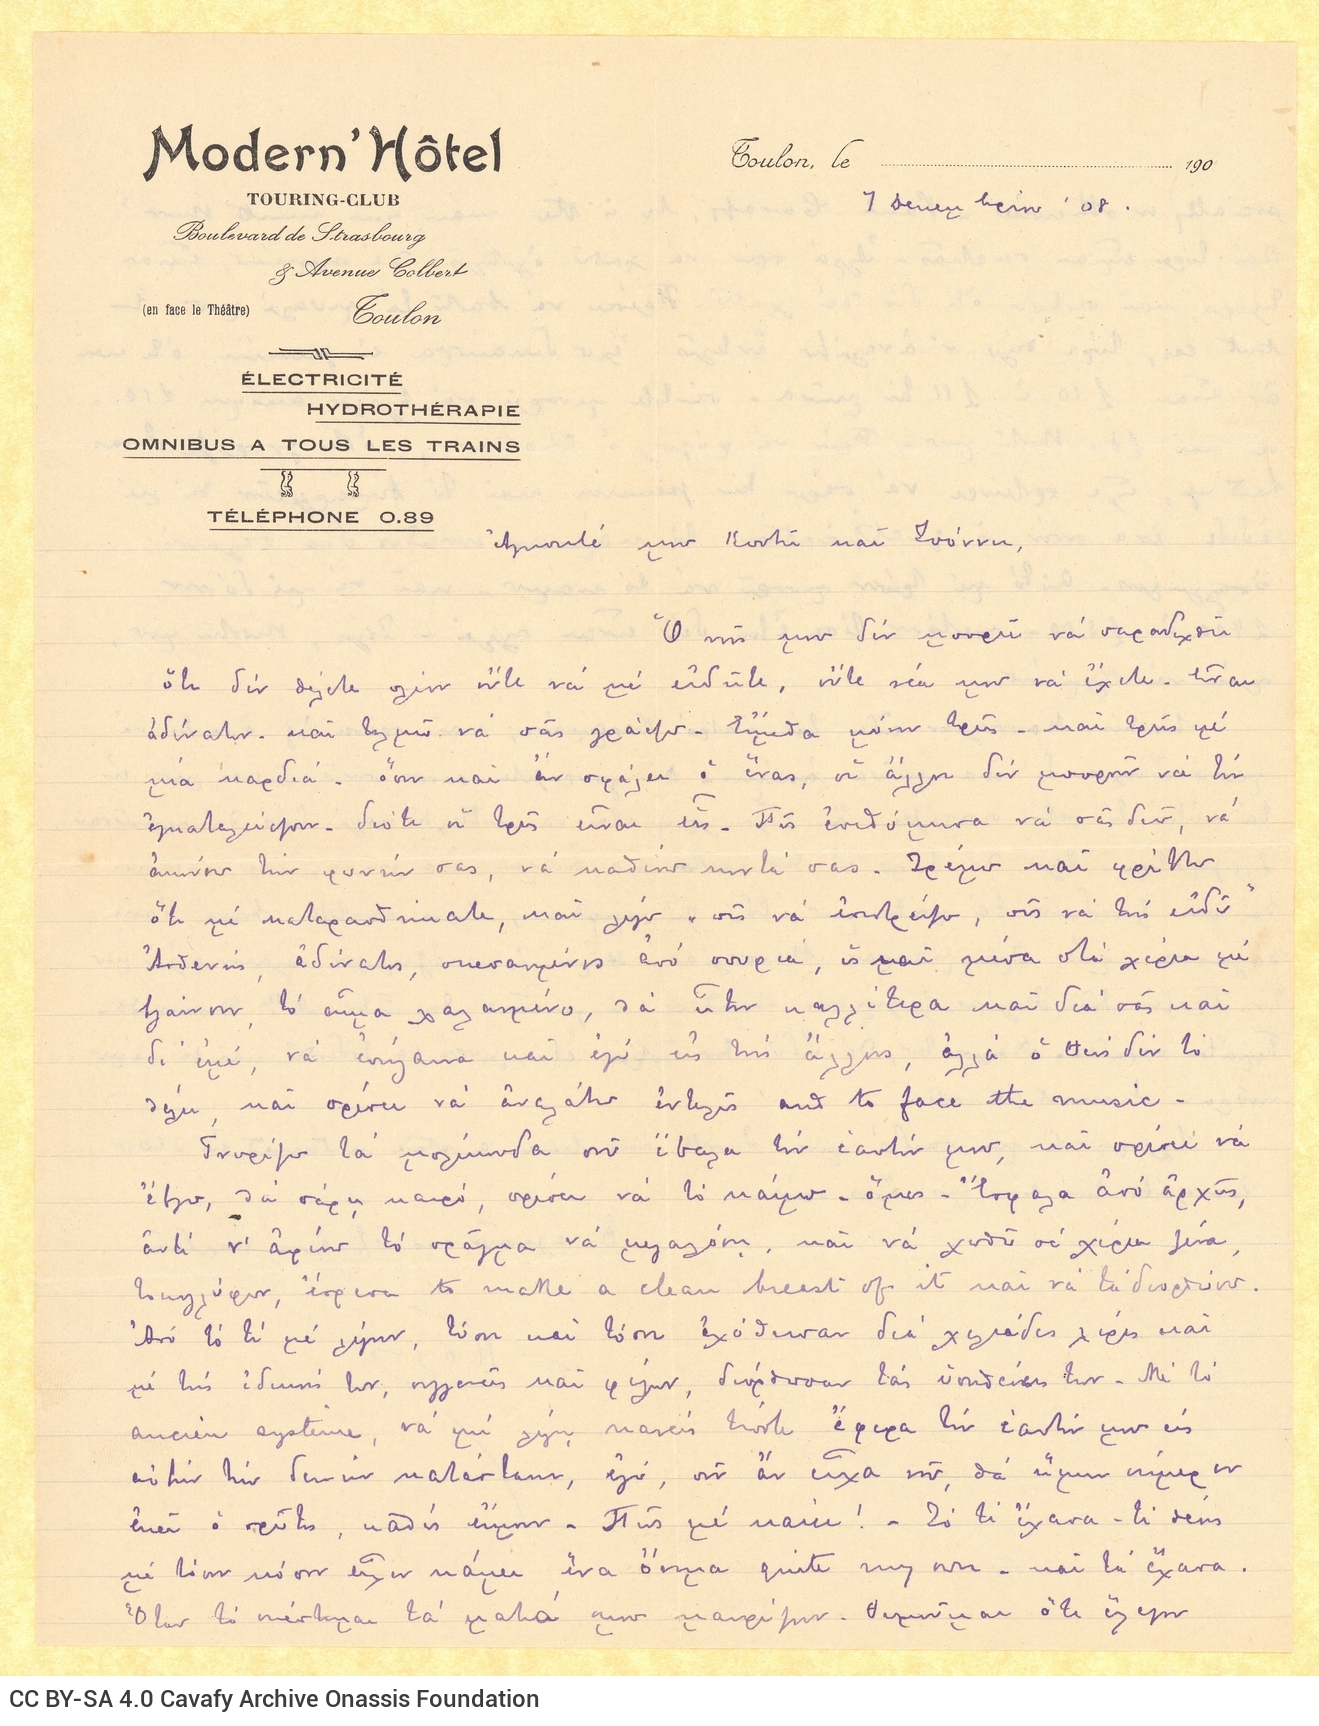 Handwritten letter by Paul Cavafy from France to C. P. Cavafy and John Cavafy, on both sides of a sheet. Reference to the pen